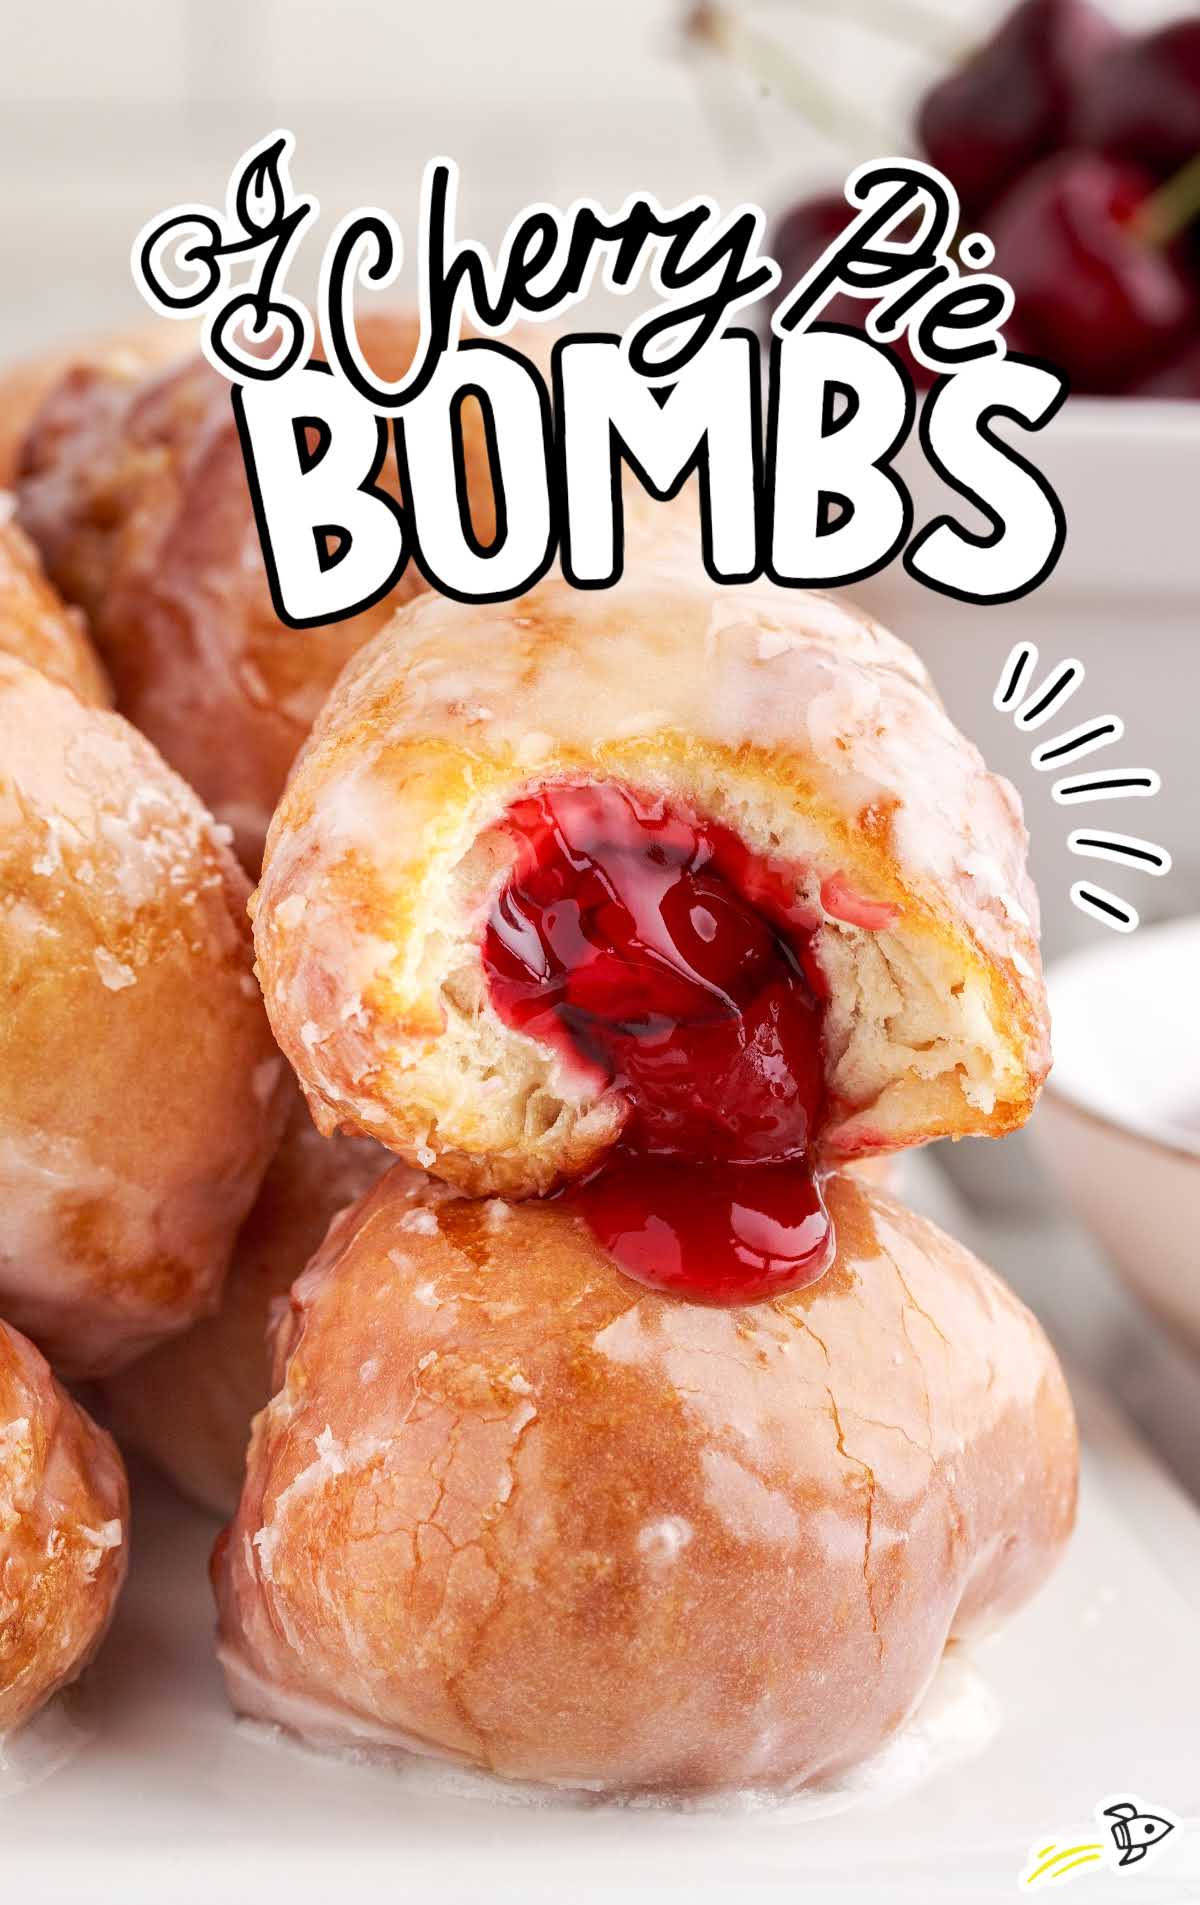 close up shot of Cherry Pie Bombs with a bite taken out of one of the bombs